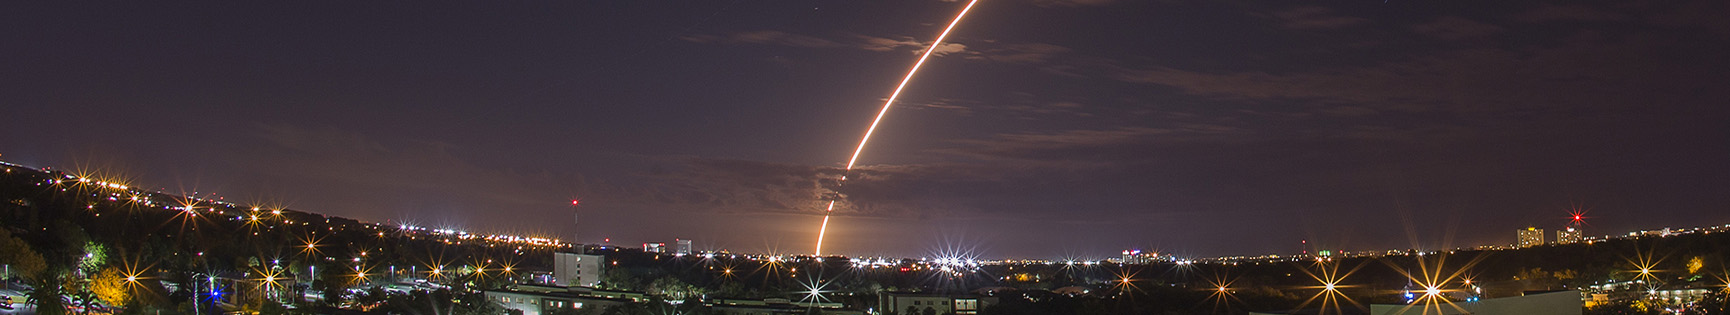 Rocket Launch from Cape Canaveral